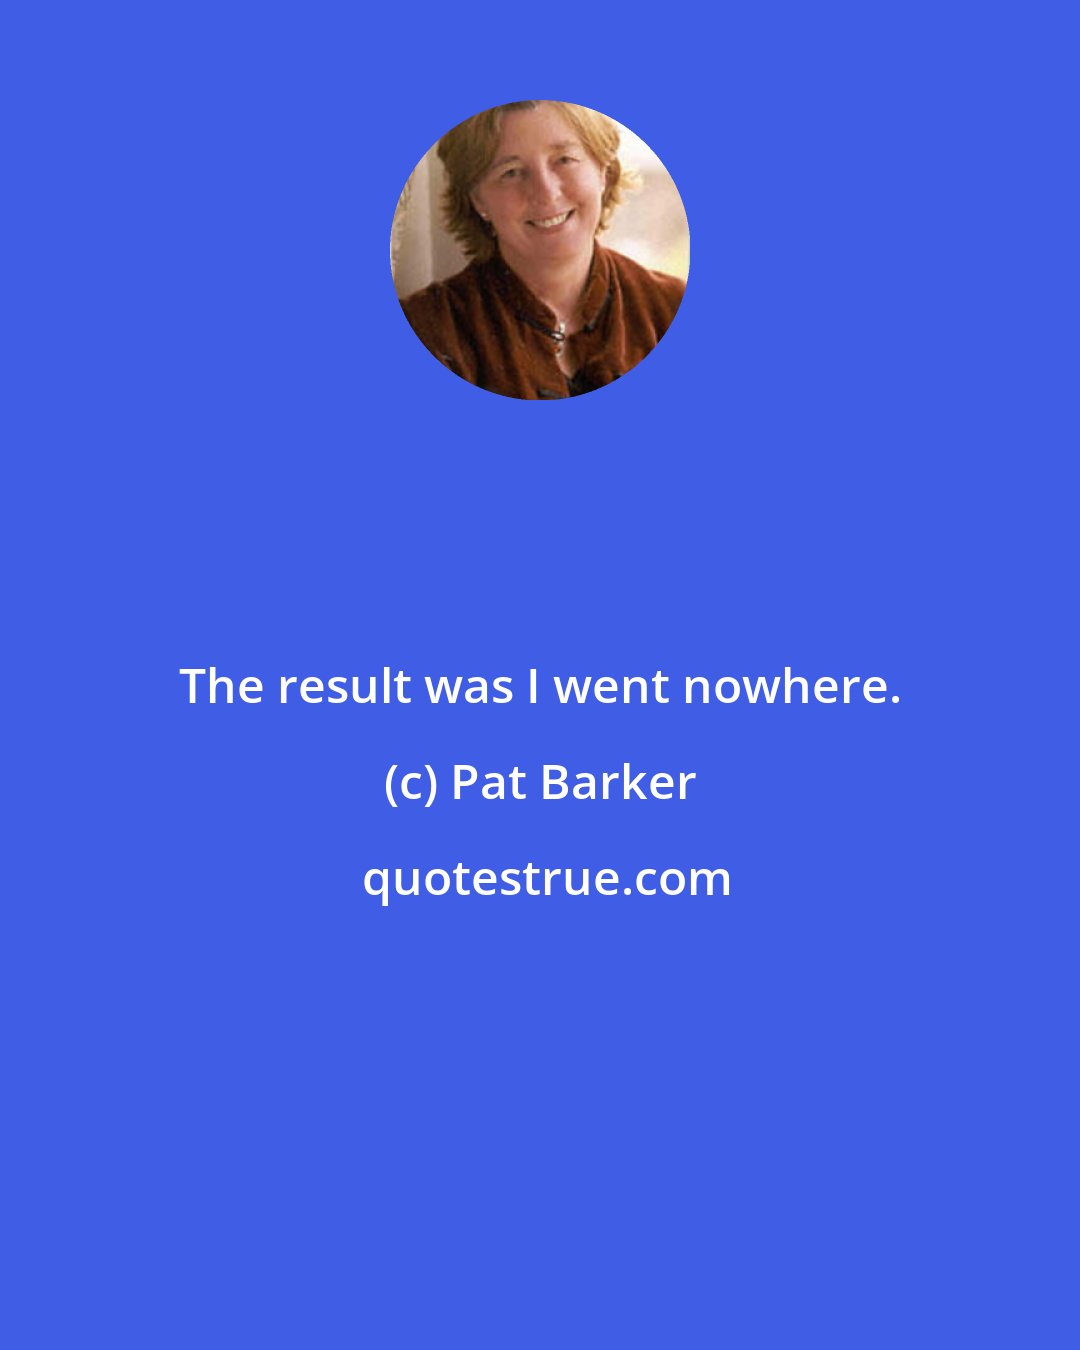 Pat Barker: The result was I went nowhere.